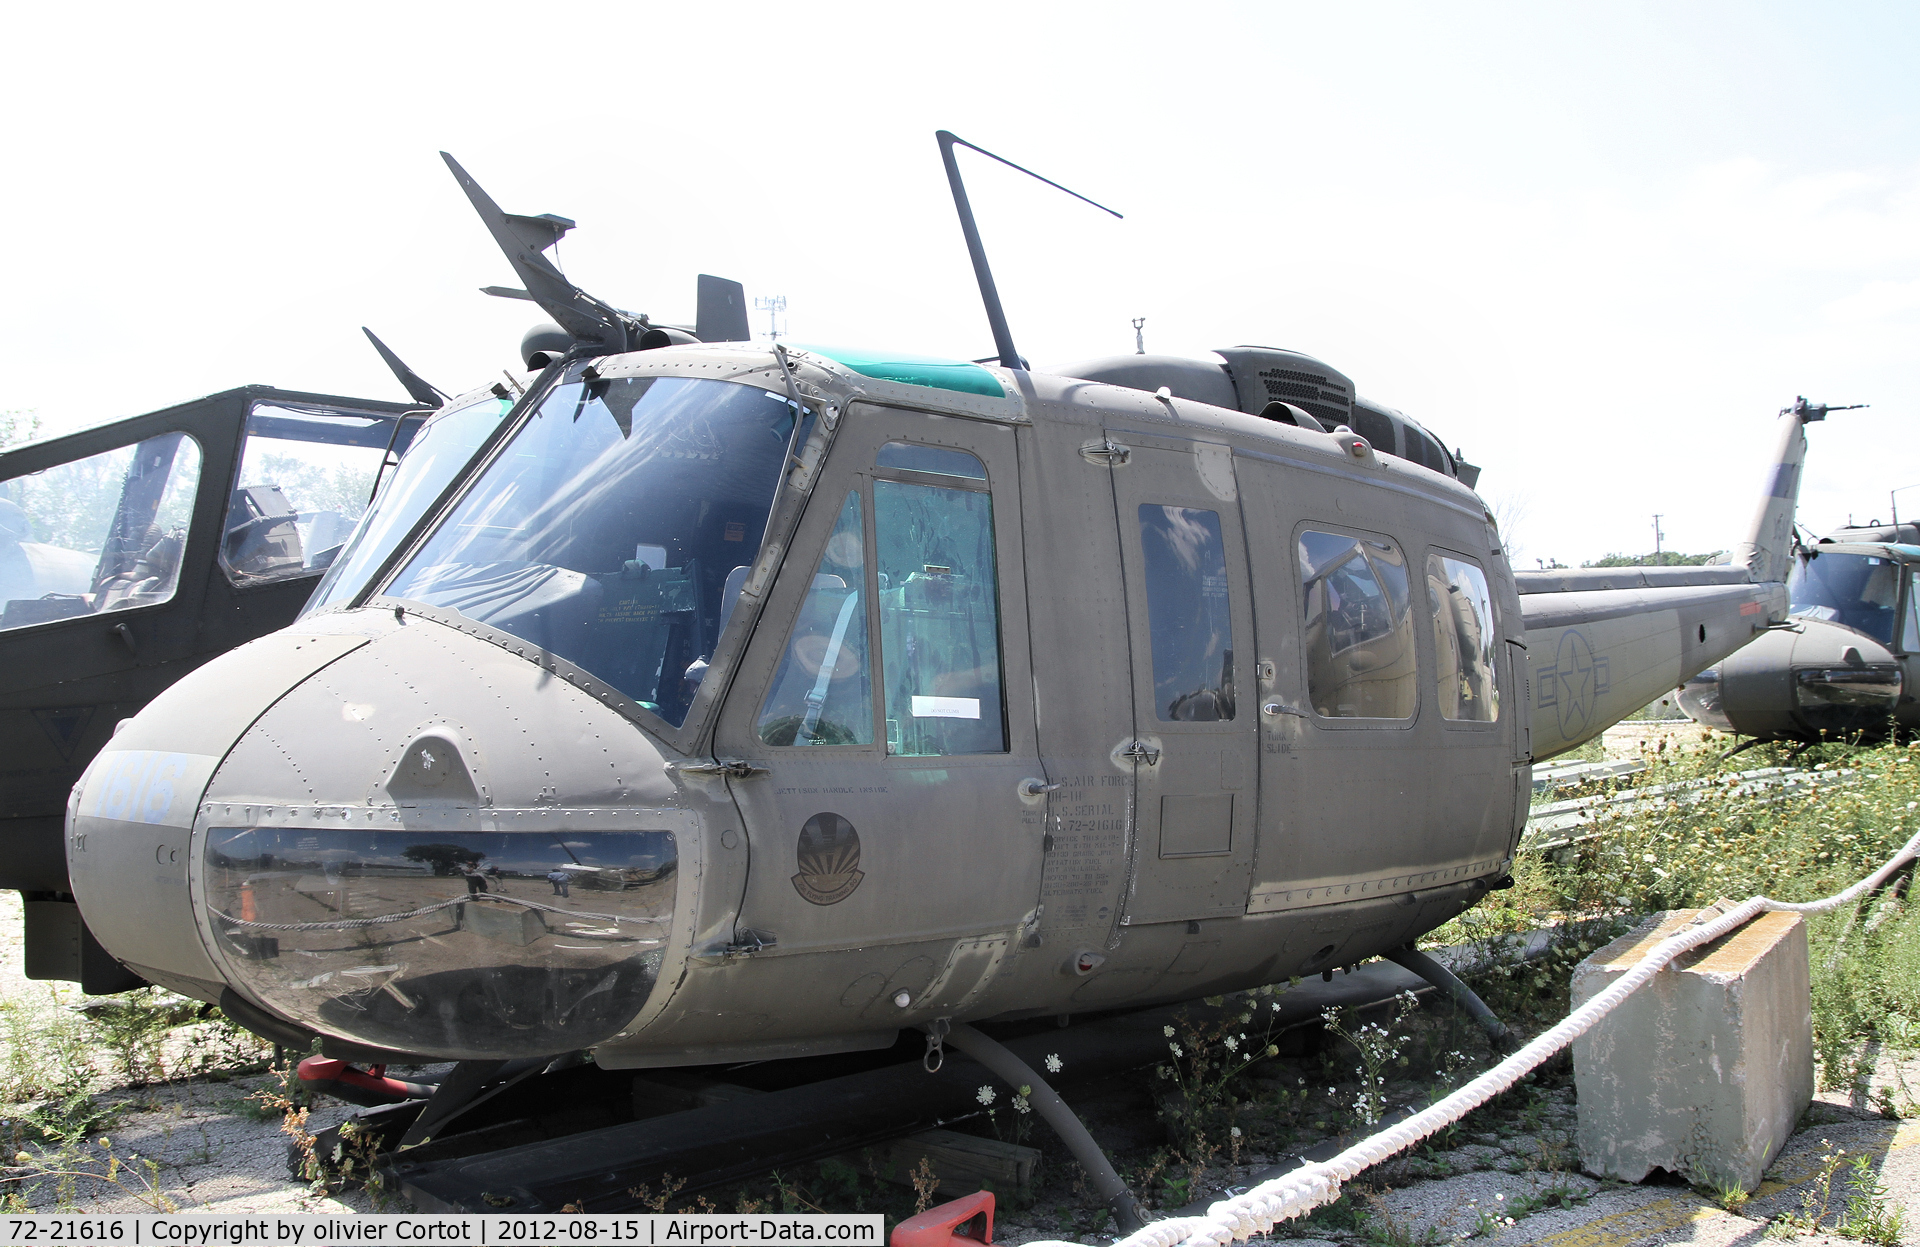 72-21616, 1972 Bell UH-1H Iroquois C/N 13315, Russel military museum